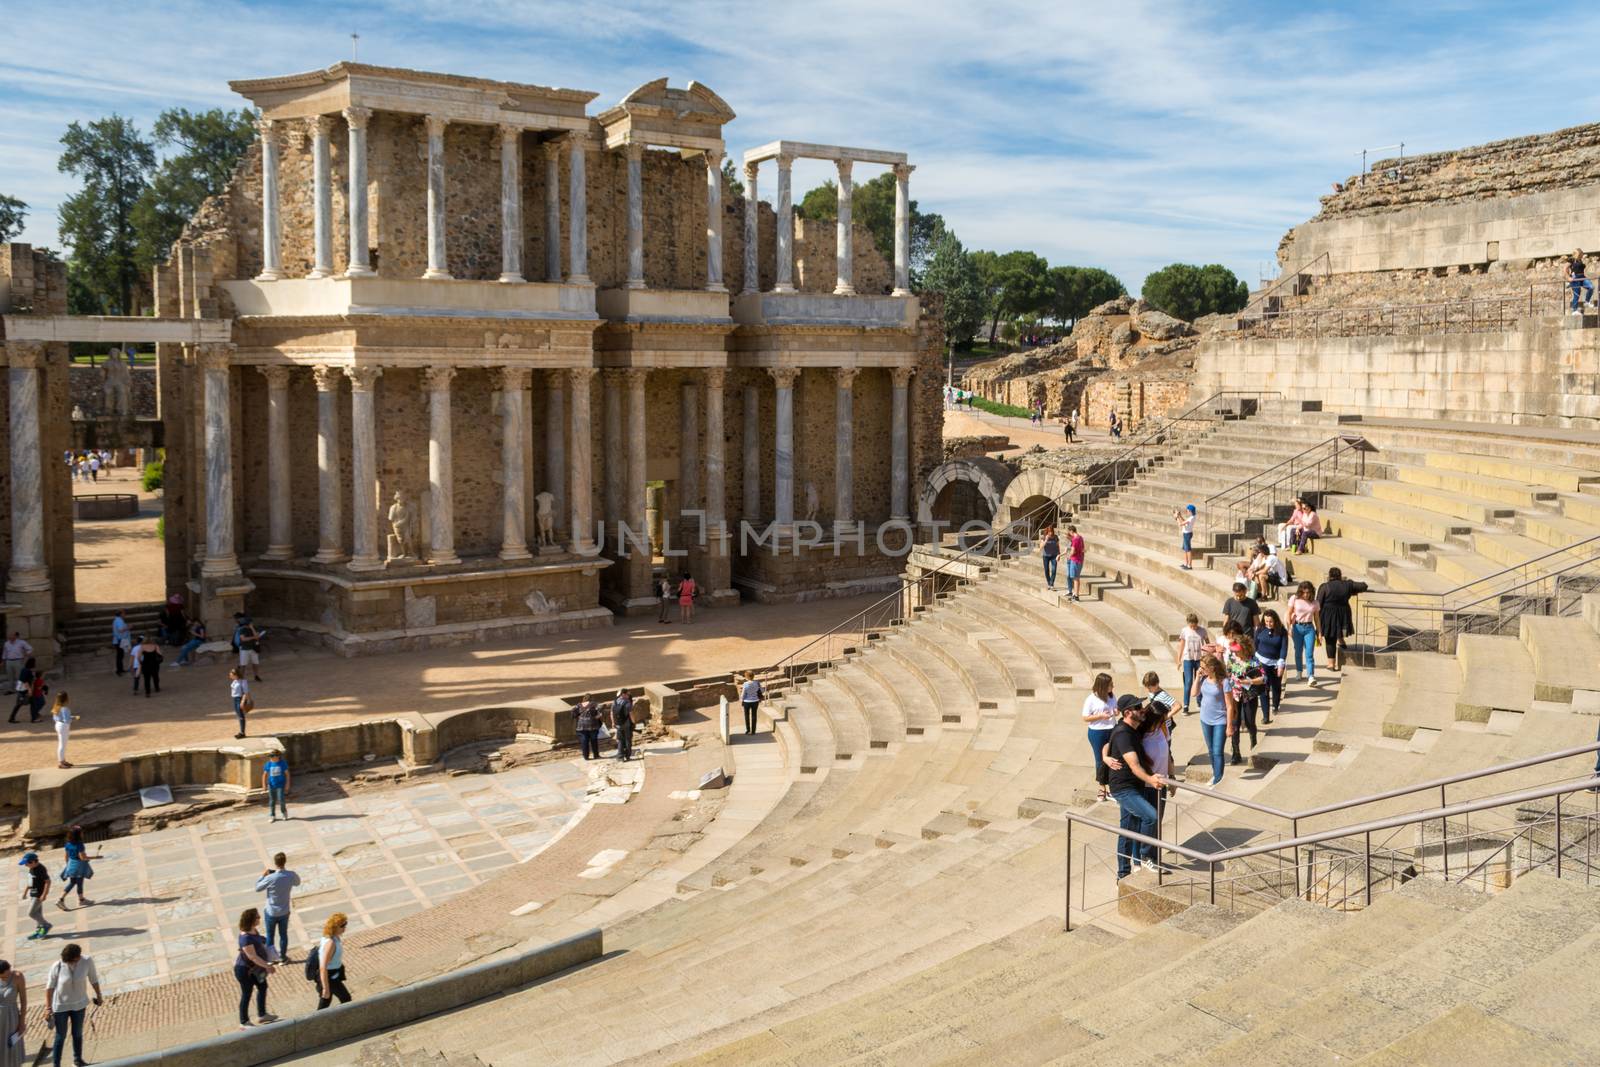 tourists visiting the Roman ruins theatre arena & waiting rooms used for gladiator & animal fights in Merida, Spain by kb79